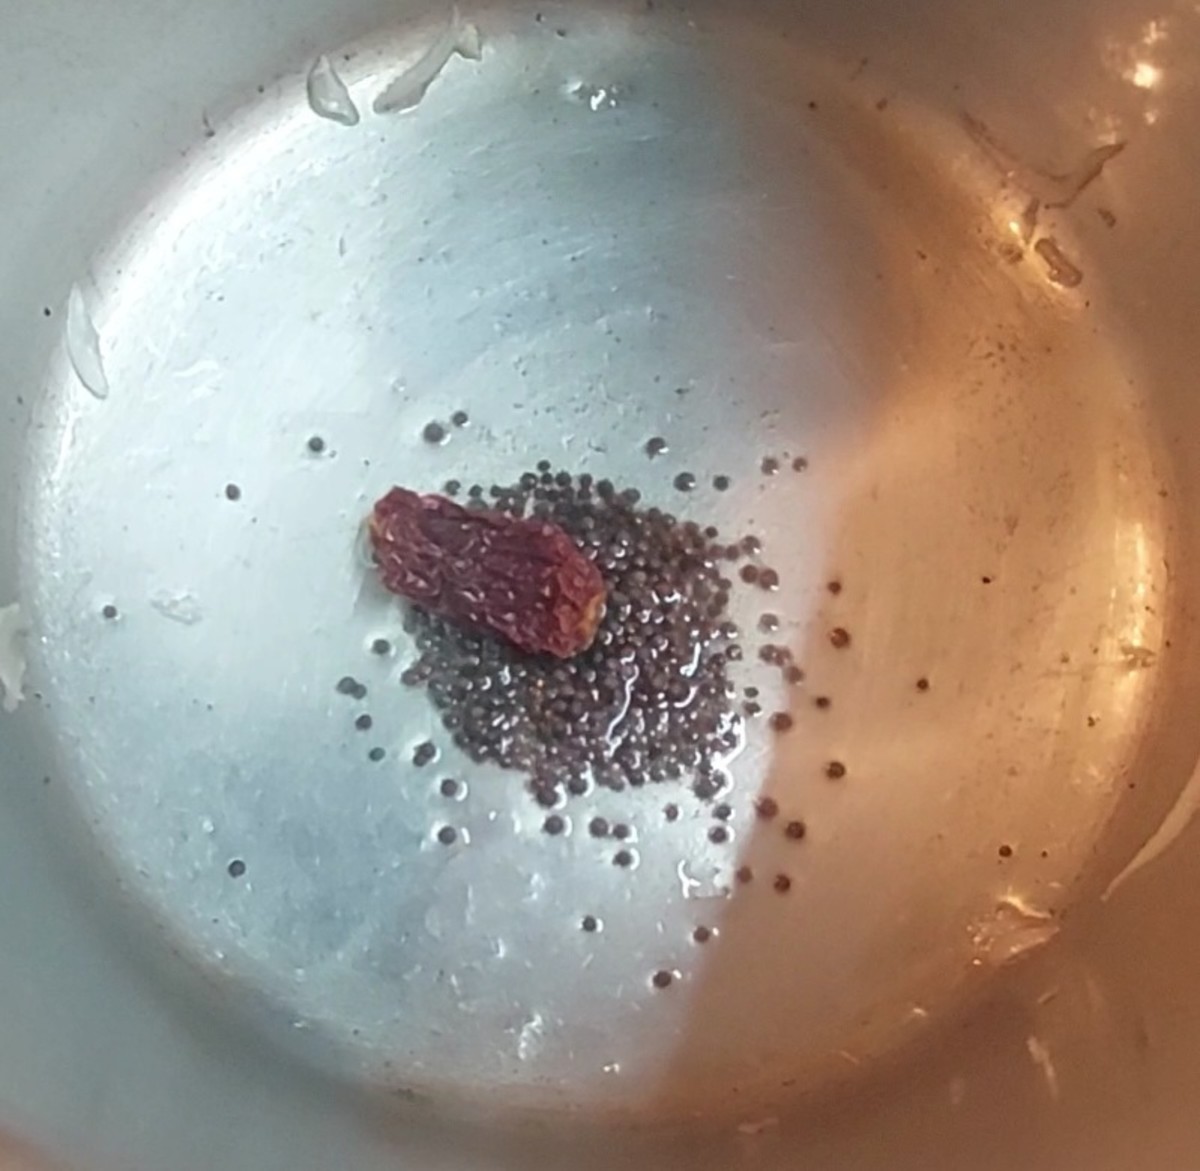 In a cooker, heat 1 tablespoon oil and splutter 1/2 teaspoon mustard seeds. Add 1-2 broken red chilies and fry for a few seconds.